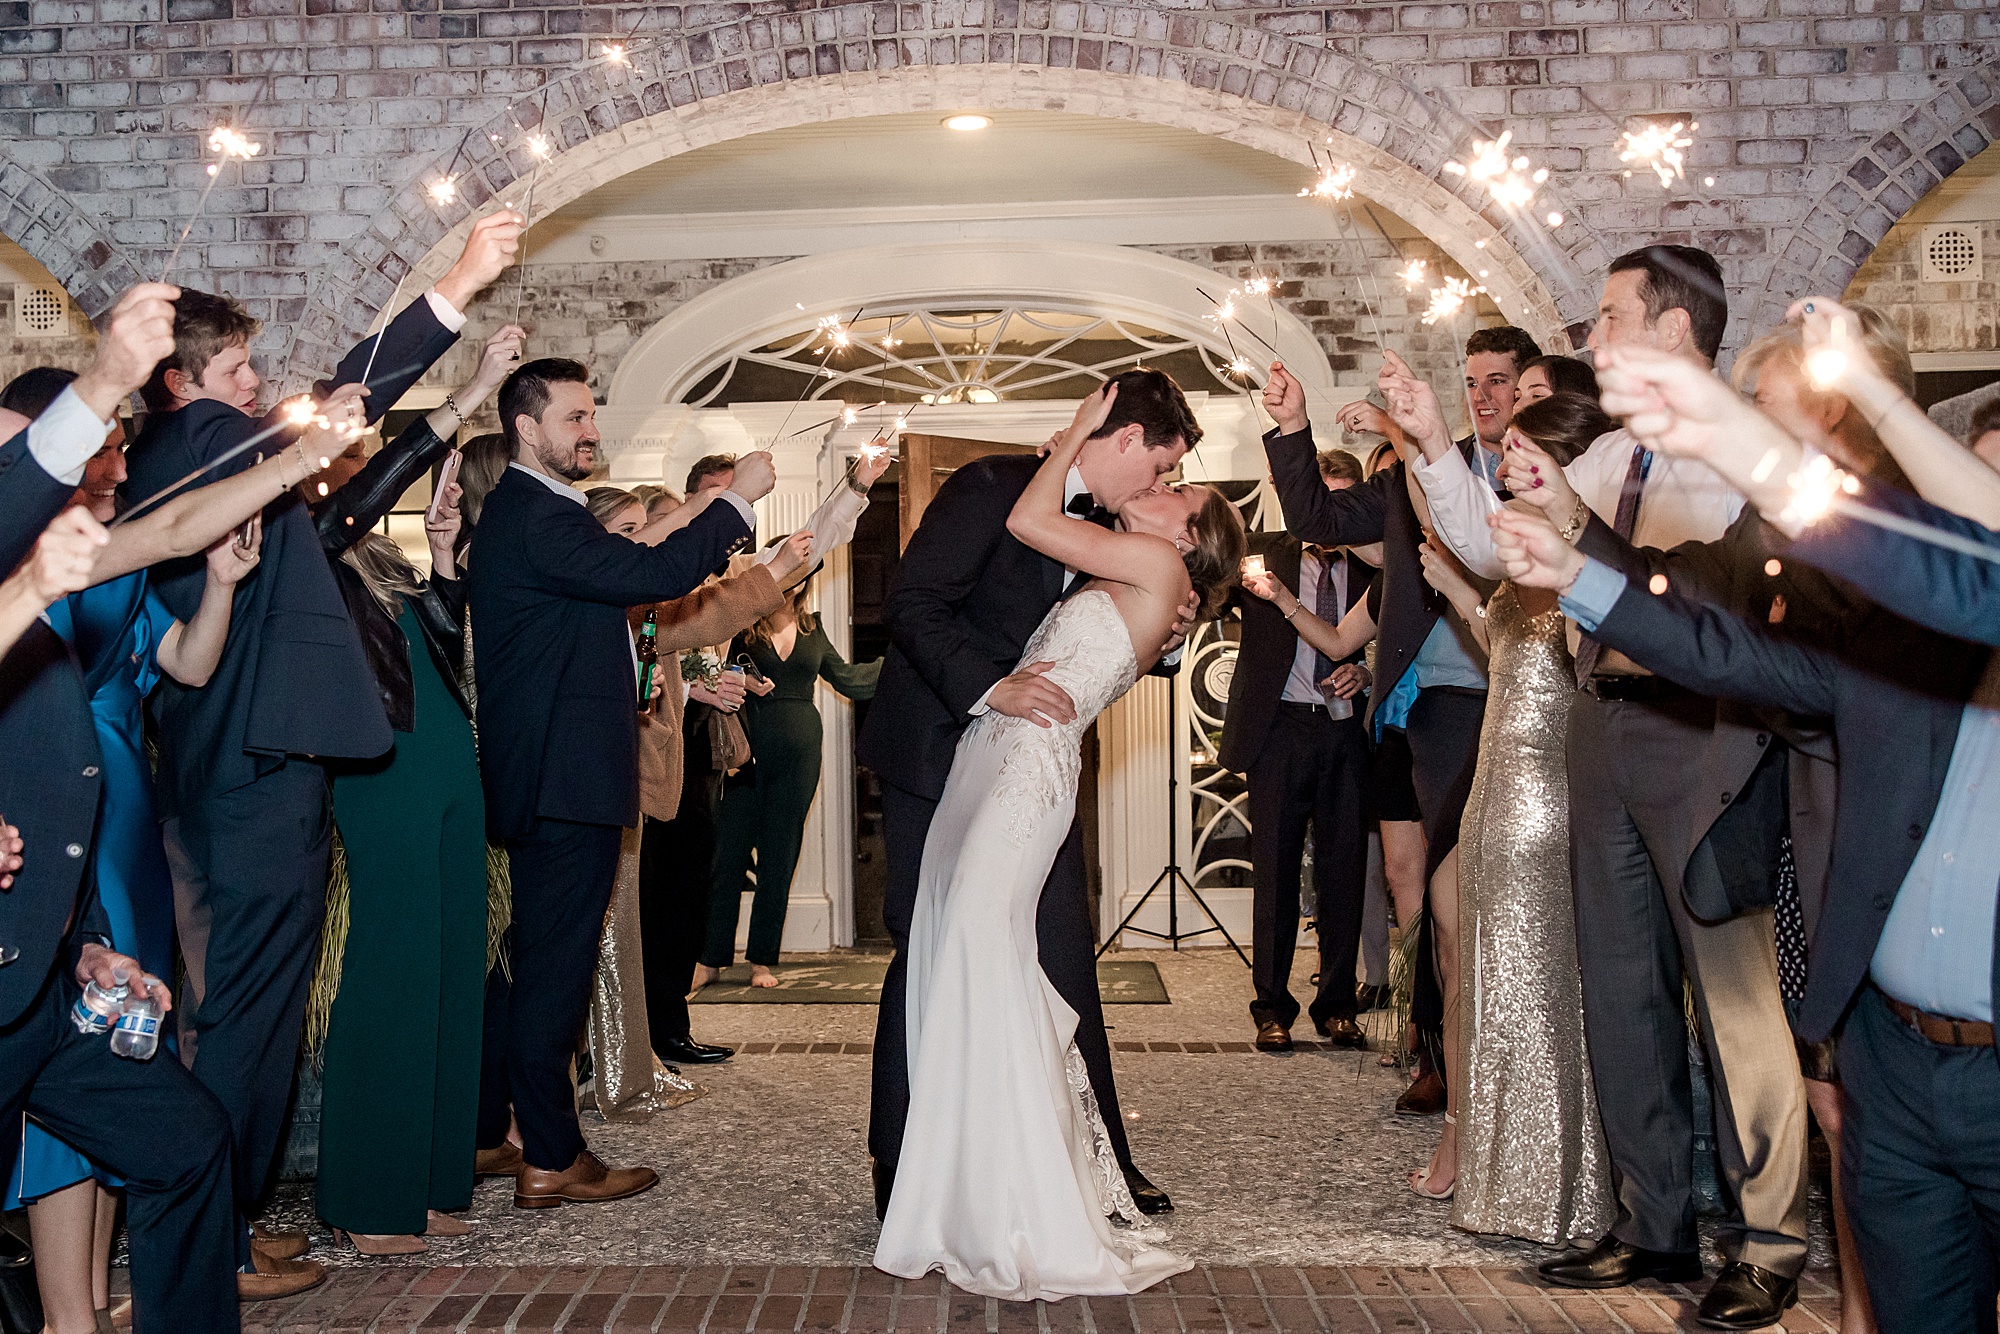 wedding guests celebrate newlyweds with sparklers as they exit